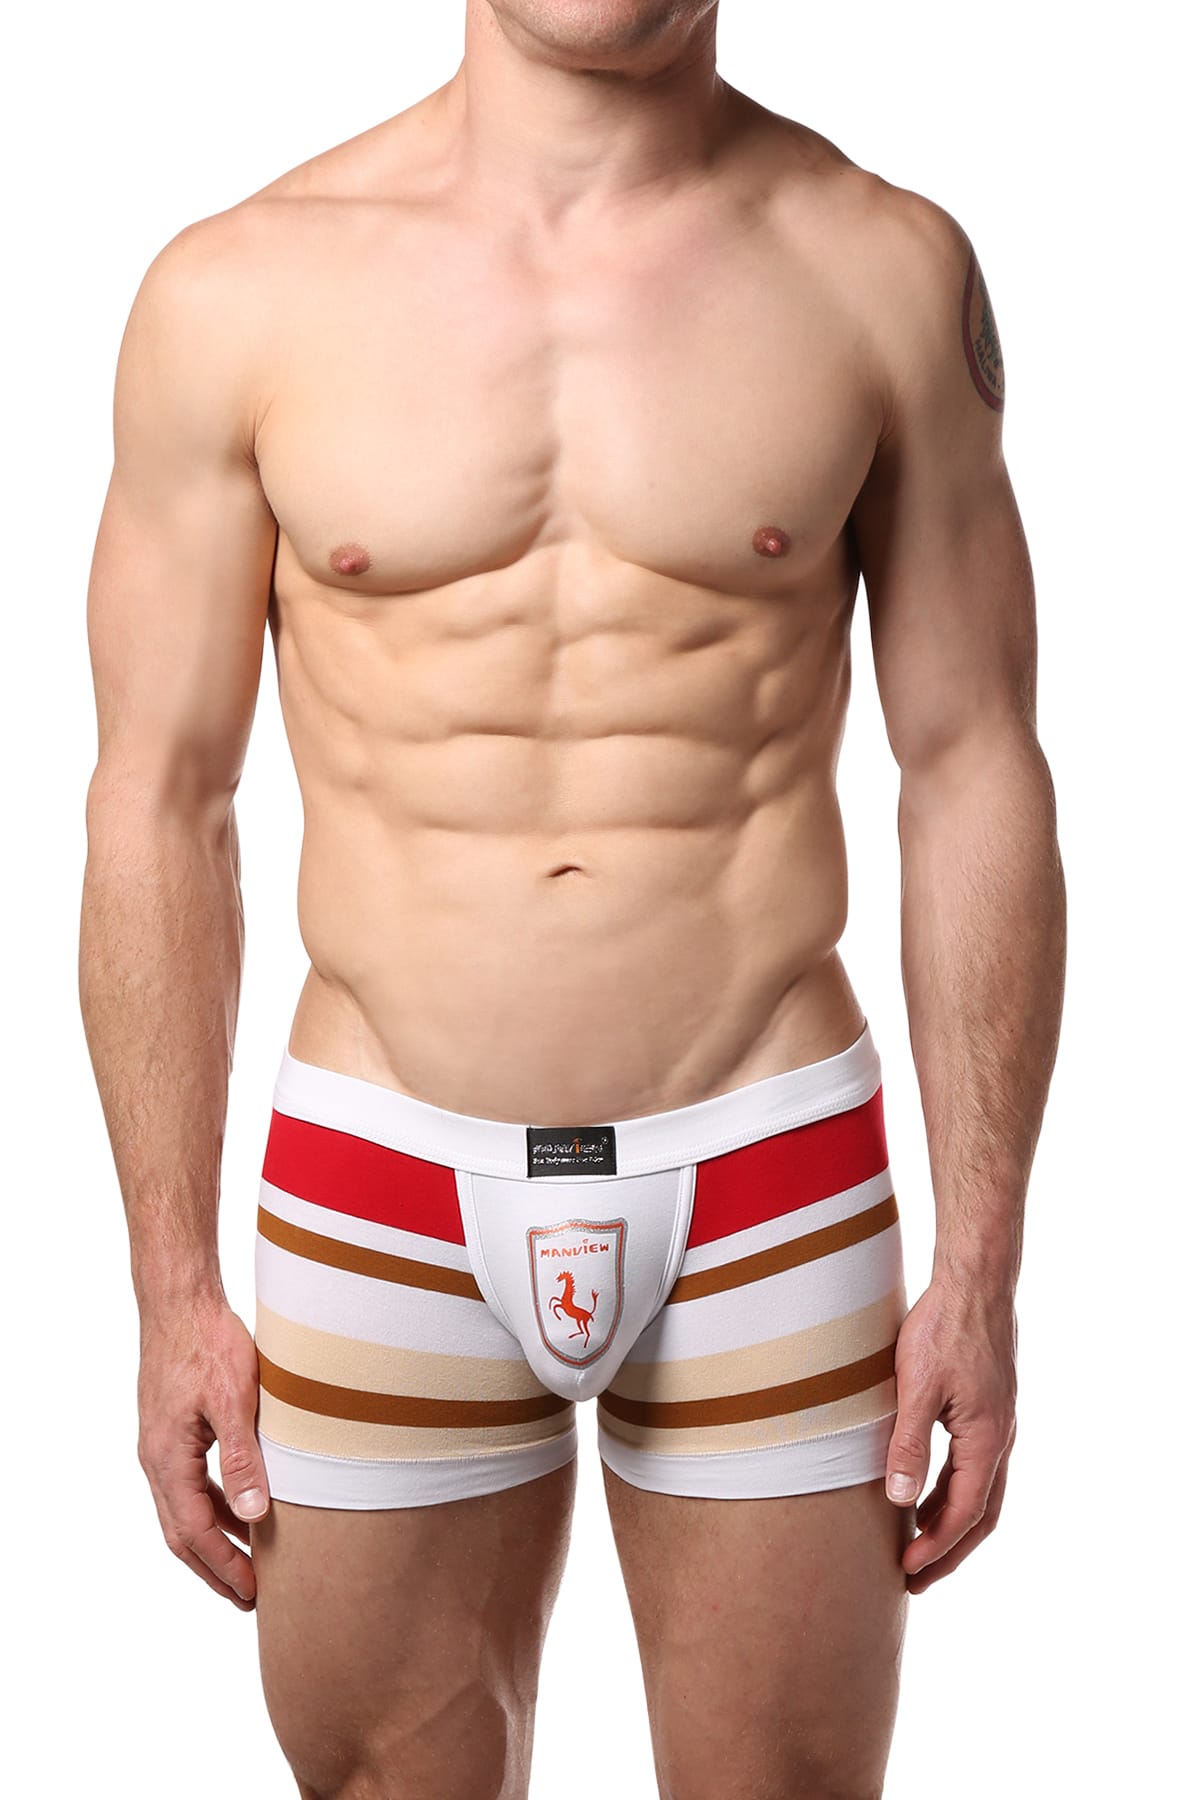 Manview Brown Striped Trunk